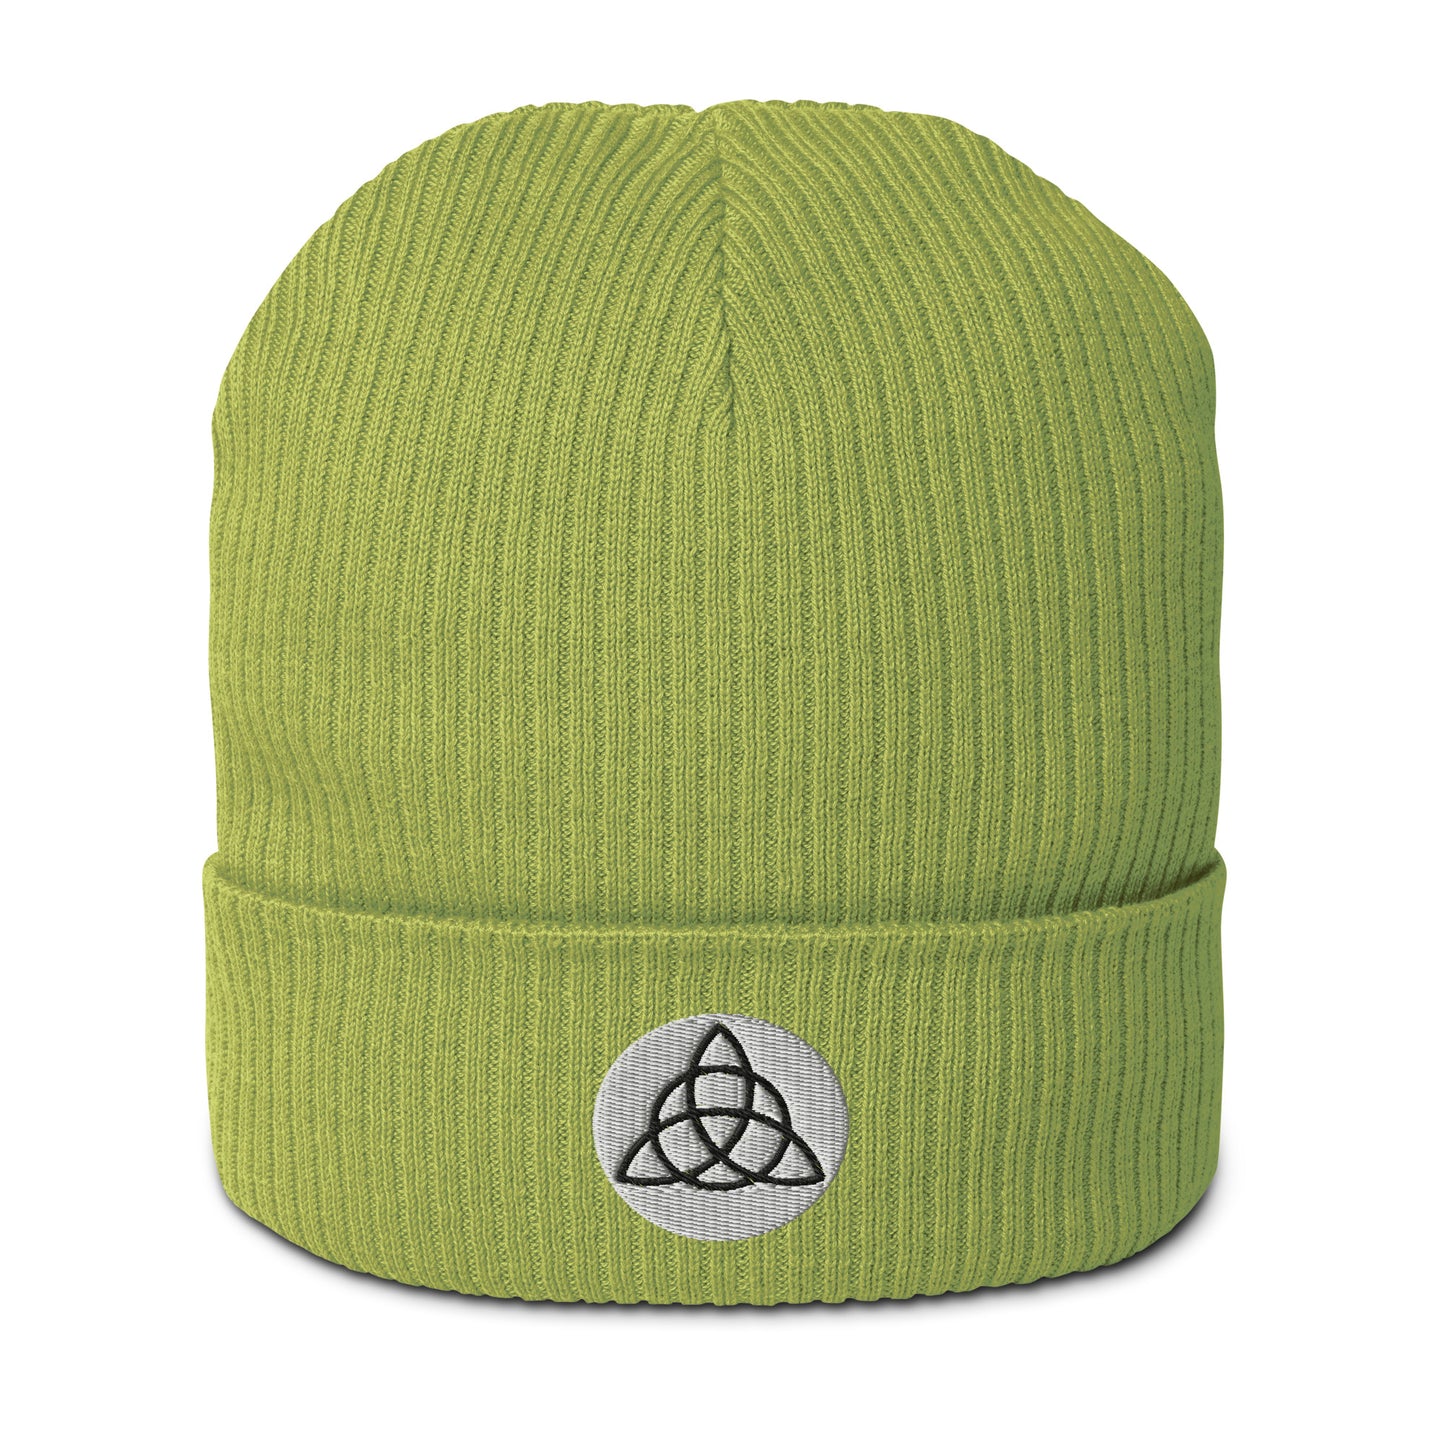 A ribbed beanie in an Apple Green hat made of organic cotton, embroidered with a Triquetra symbol, symbolizing unity, eternity, and the interconnectedness of mind, body, and spirit. This organic ribbed beanie is chic, versatile, and environmentally conscious, making it an essential addition to your hat collection. Crafted from breathable lightweight fabric, it's suitable for both indoor and outdoor wear. Made with hypoallergenic and natural materials. 